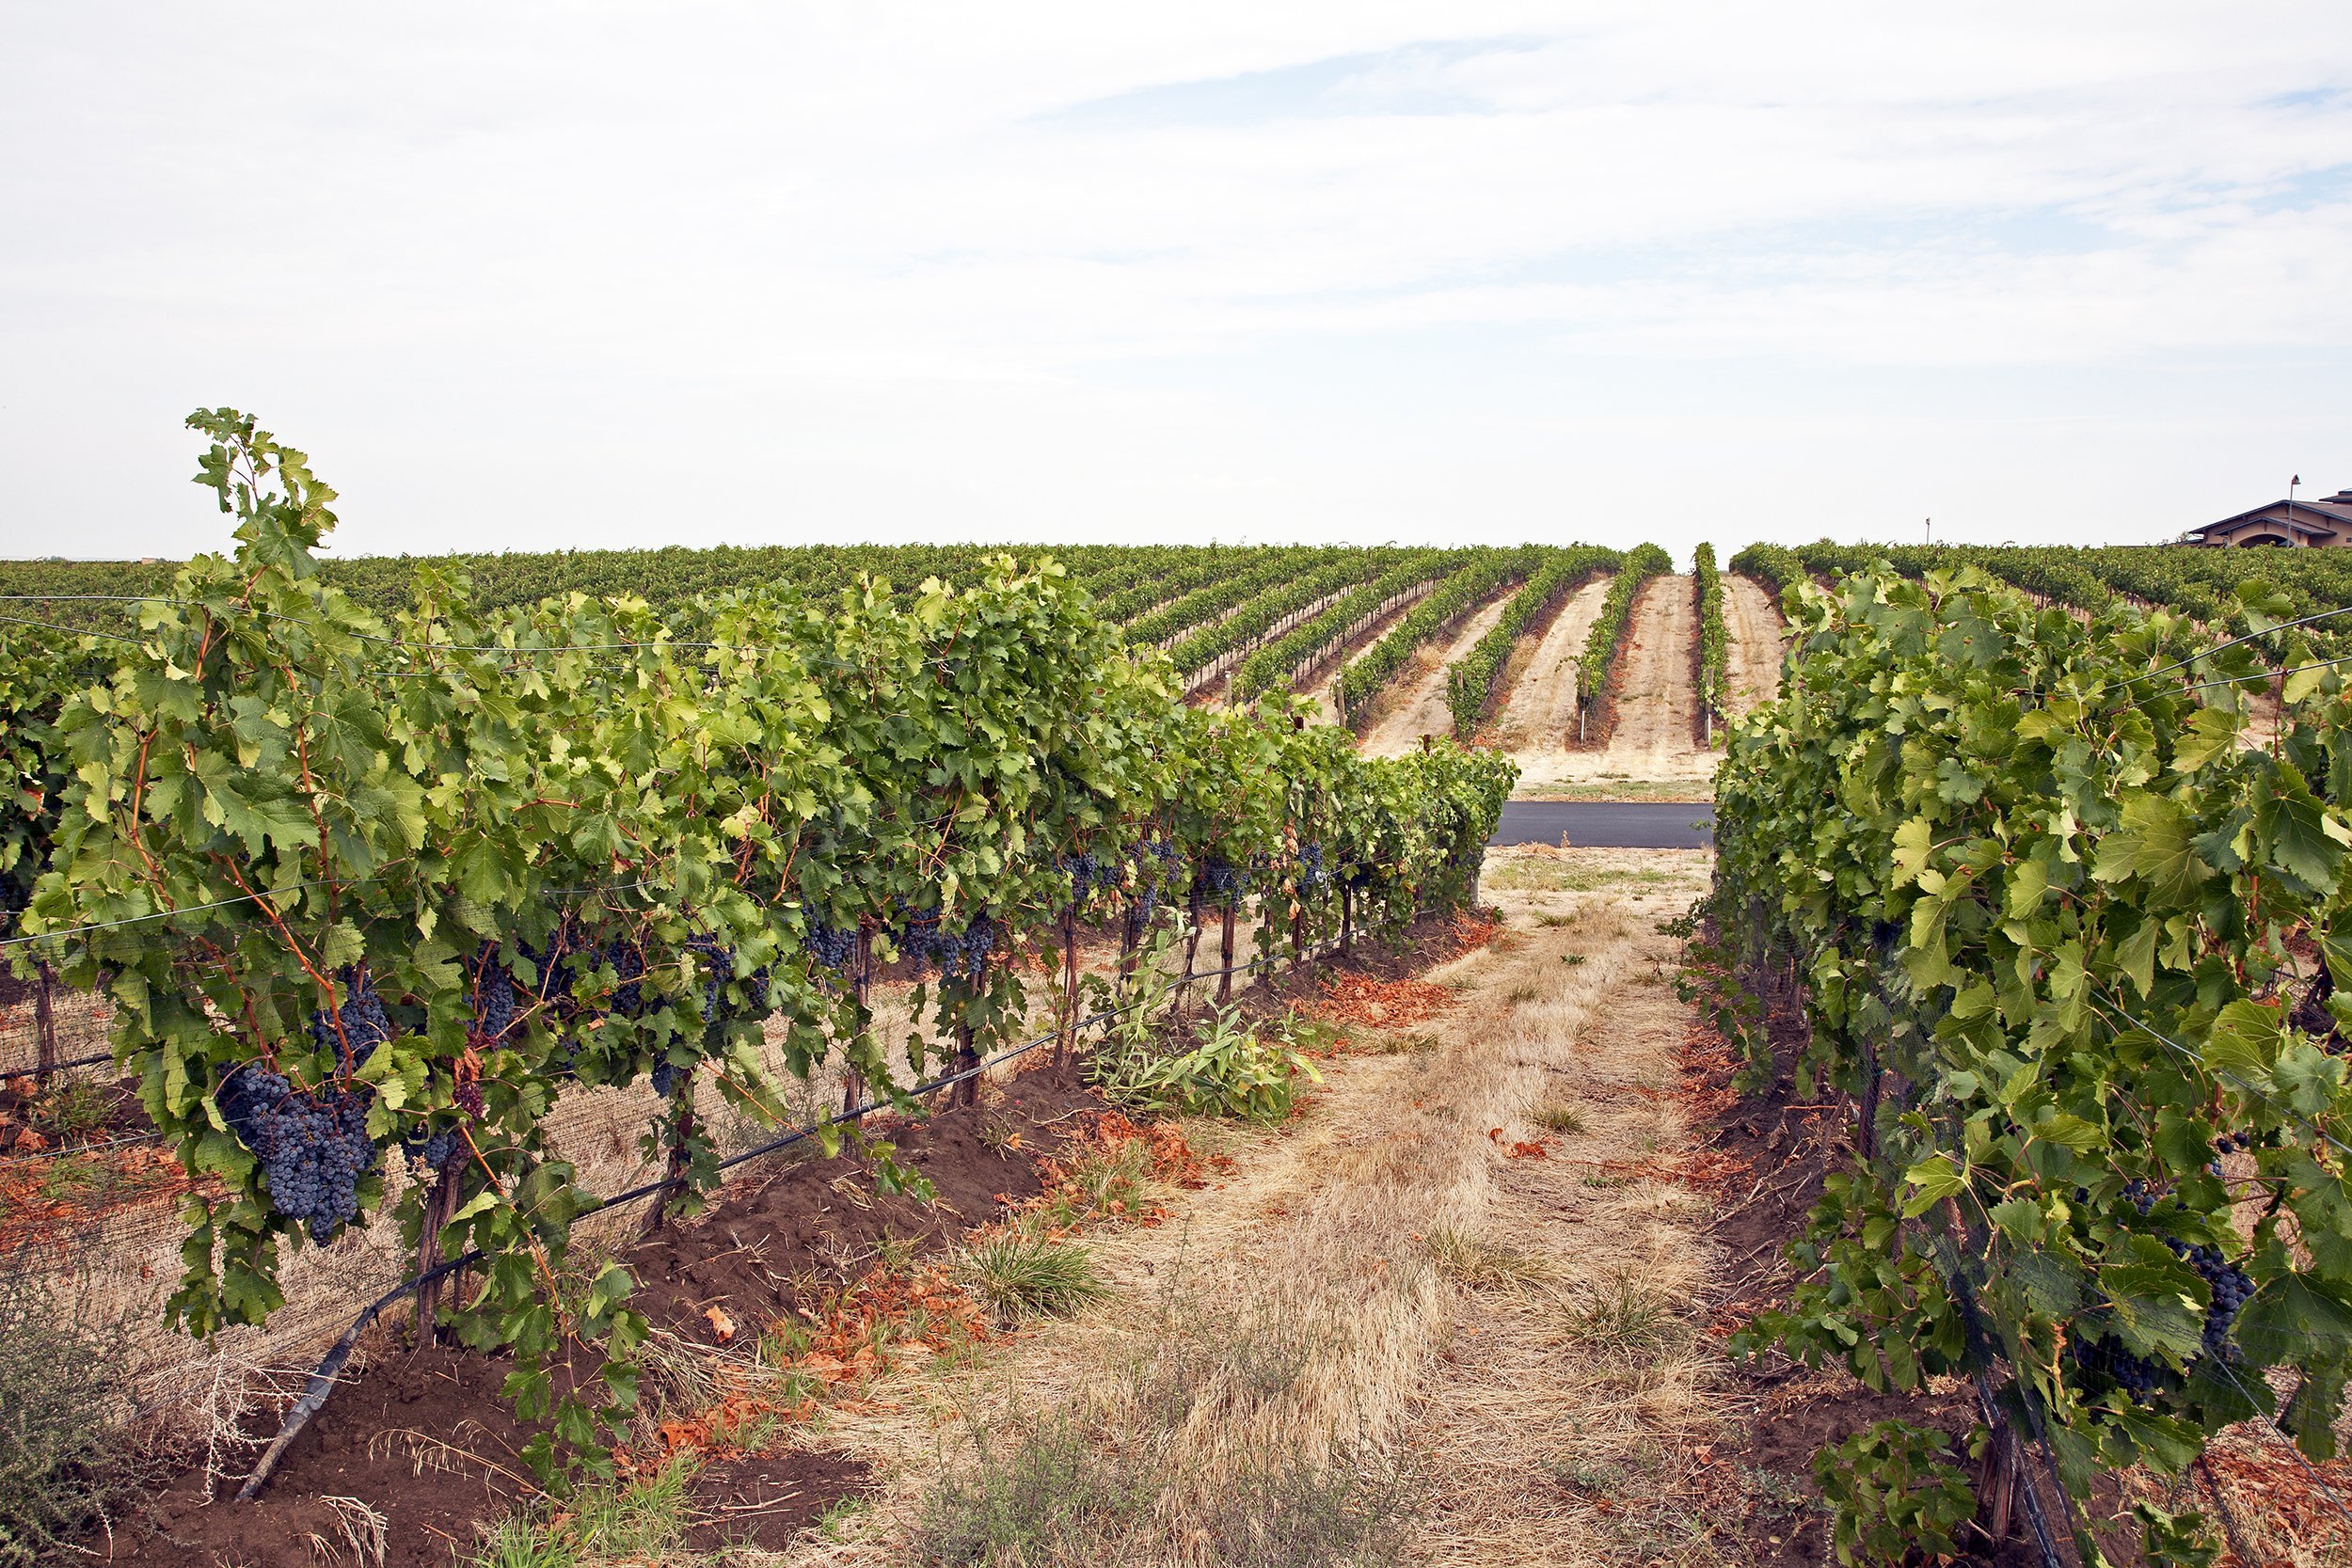 <p>Walla Walla is home to 120 wineries and has carved a niche as a global wine and culinary scene while maintaining a relaxed, small-town charm. Bike the farm-lined roads of Washington's unofficial wine capital by renting a cruiser for $10 an hour at Allegro Cyclery.</p>